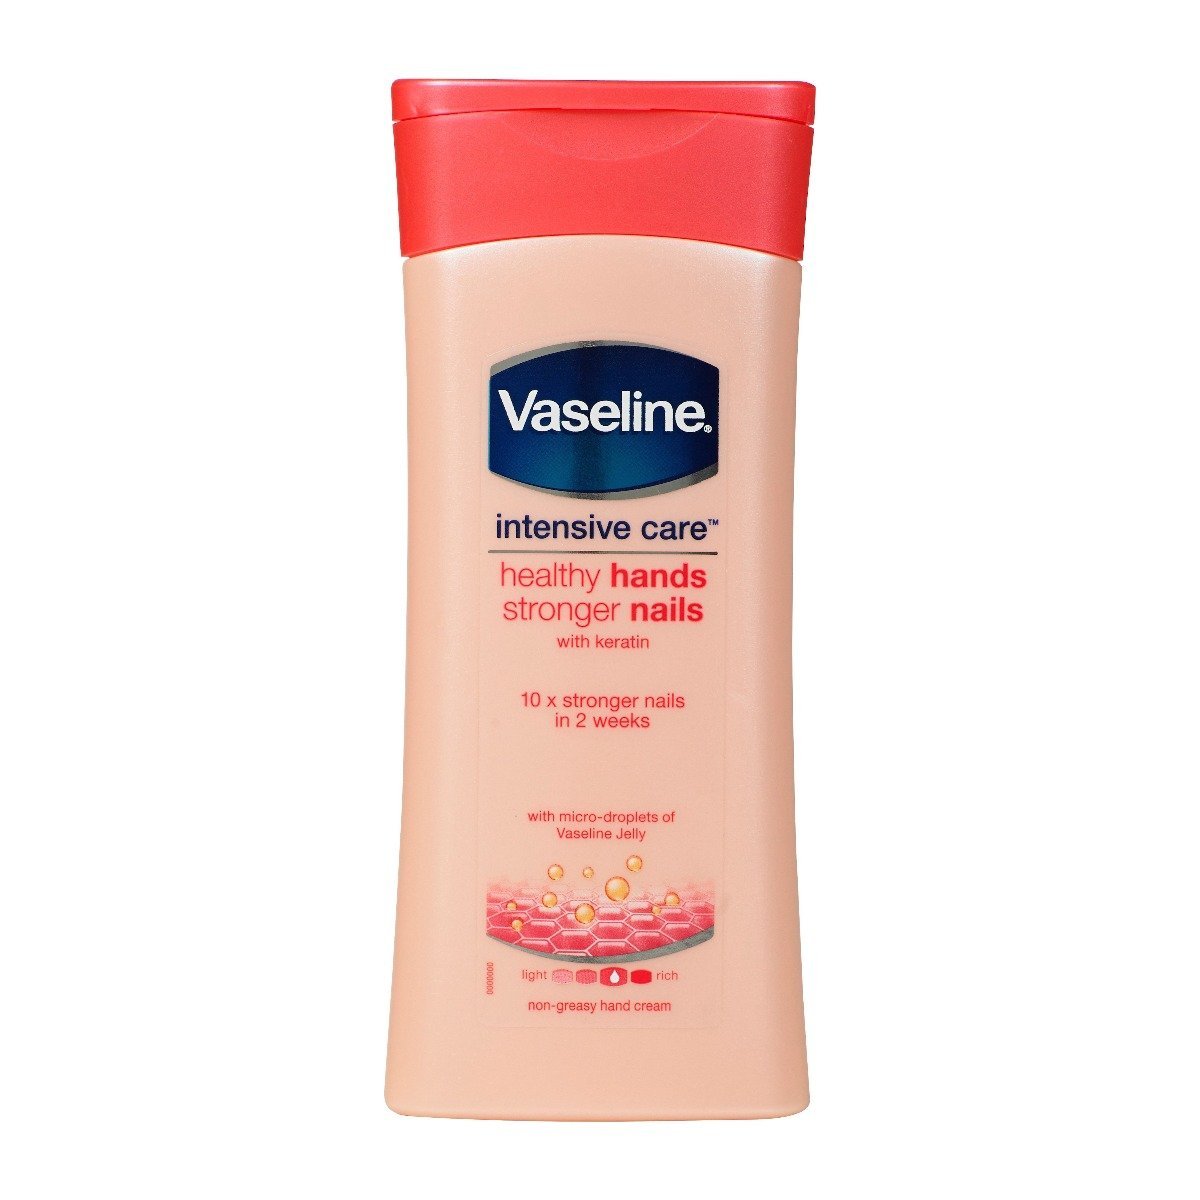 Vaseline Intensive Care Healthy Hands Stronger Nails Lotion - Bloom Pharmacy